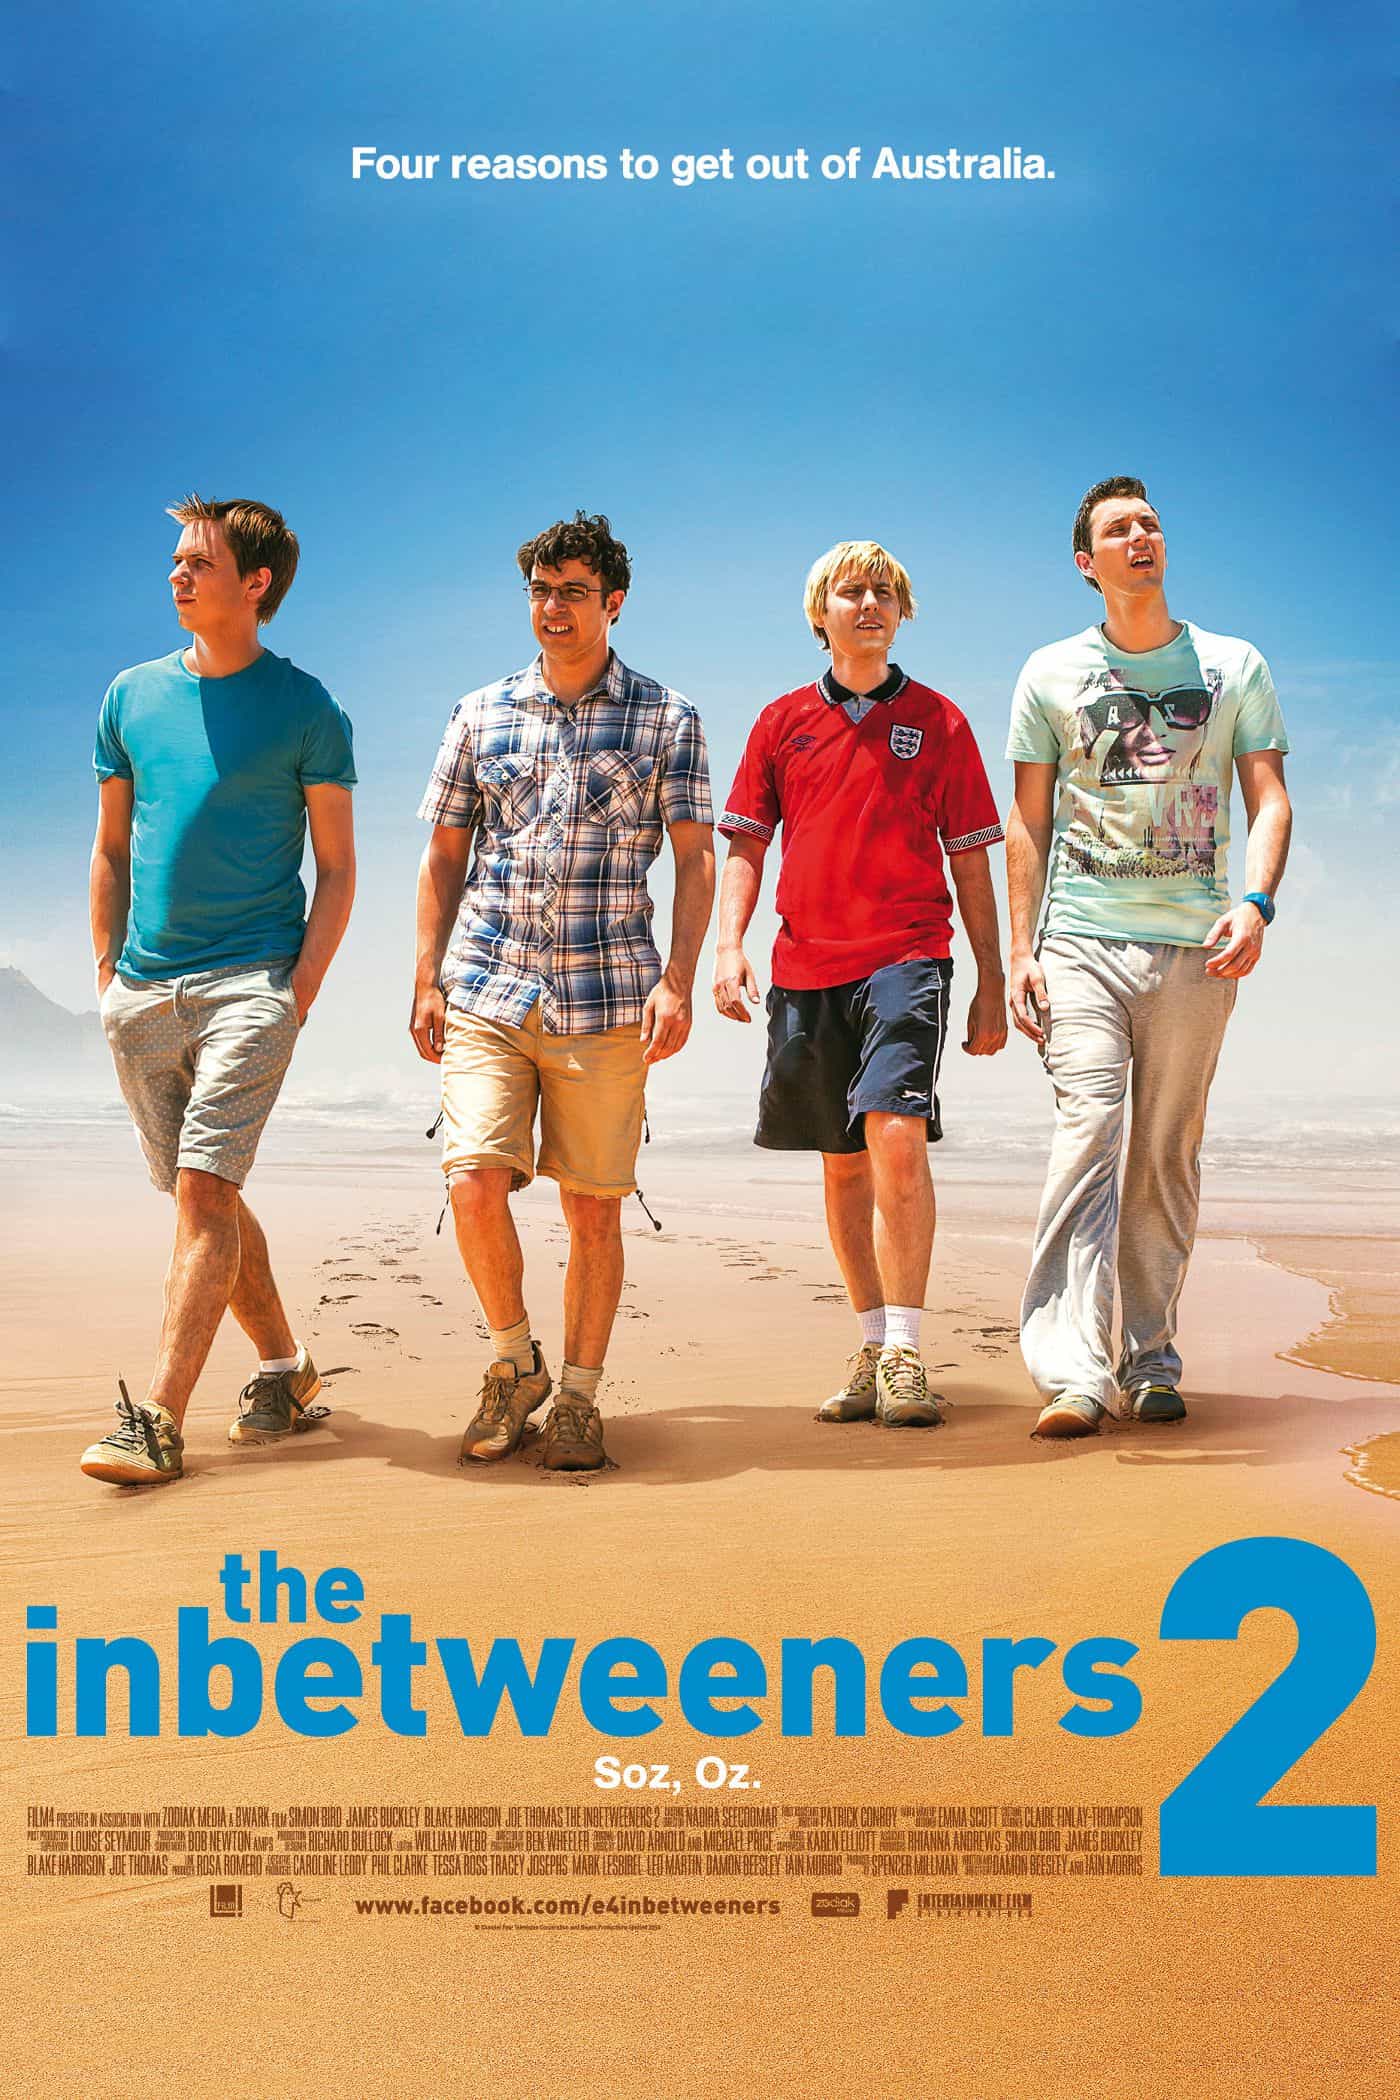 First teaser trailer for The Inbetweeners 2 - Australia watch out here they come - film out on 6th August